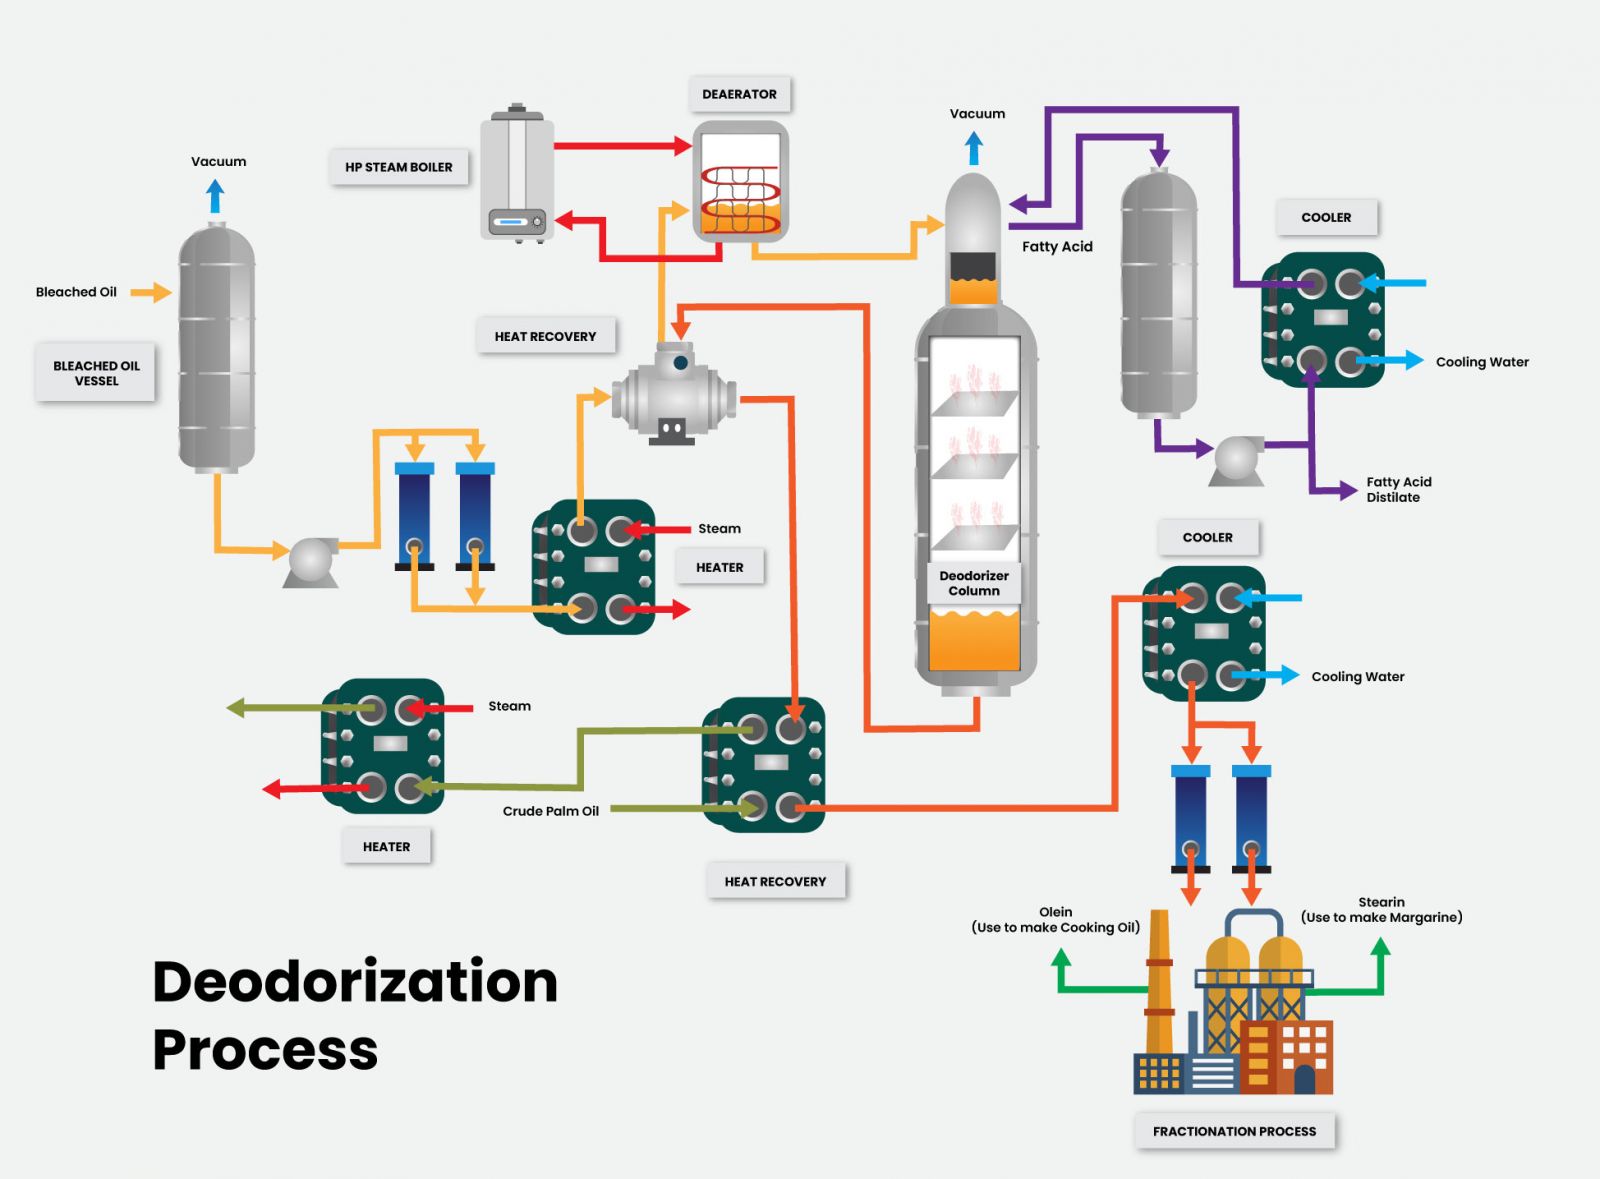 The importance of an economizer and deodorization process